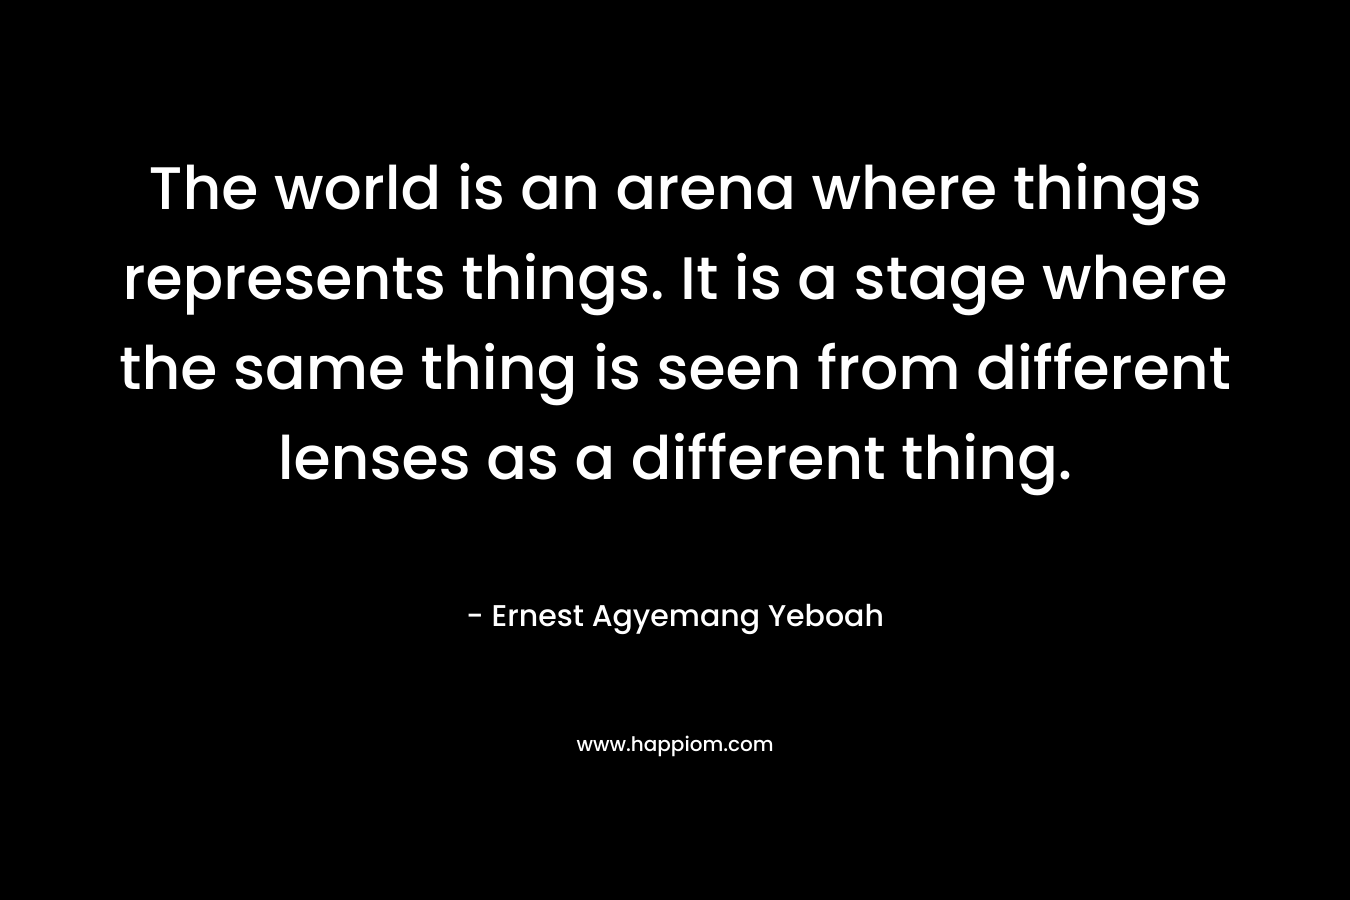 The world is an arena where things represents things. It is a stage where the same thing is seen from different lenses as a different thing.